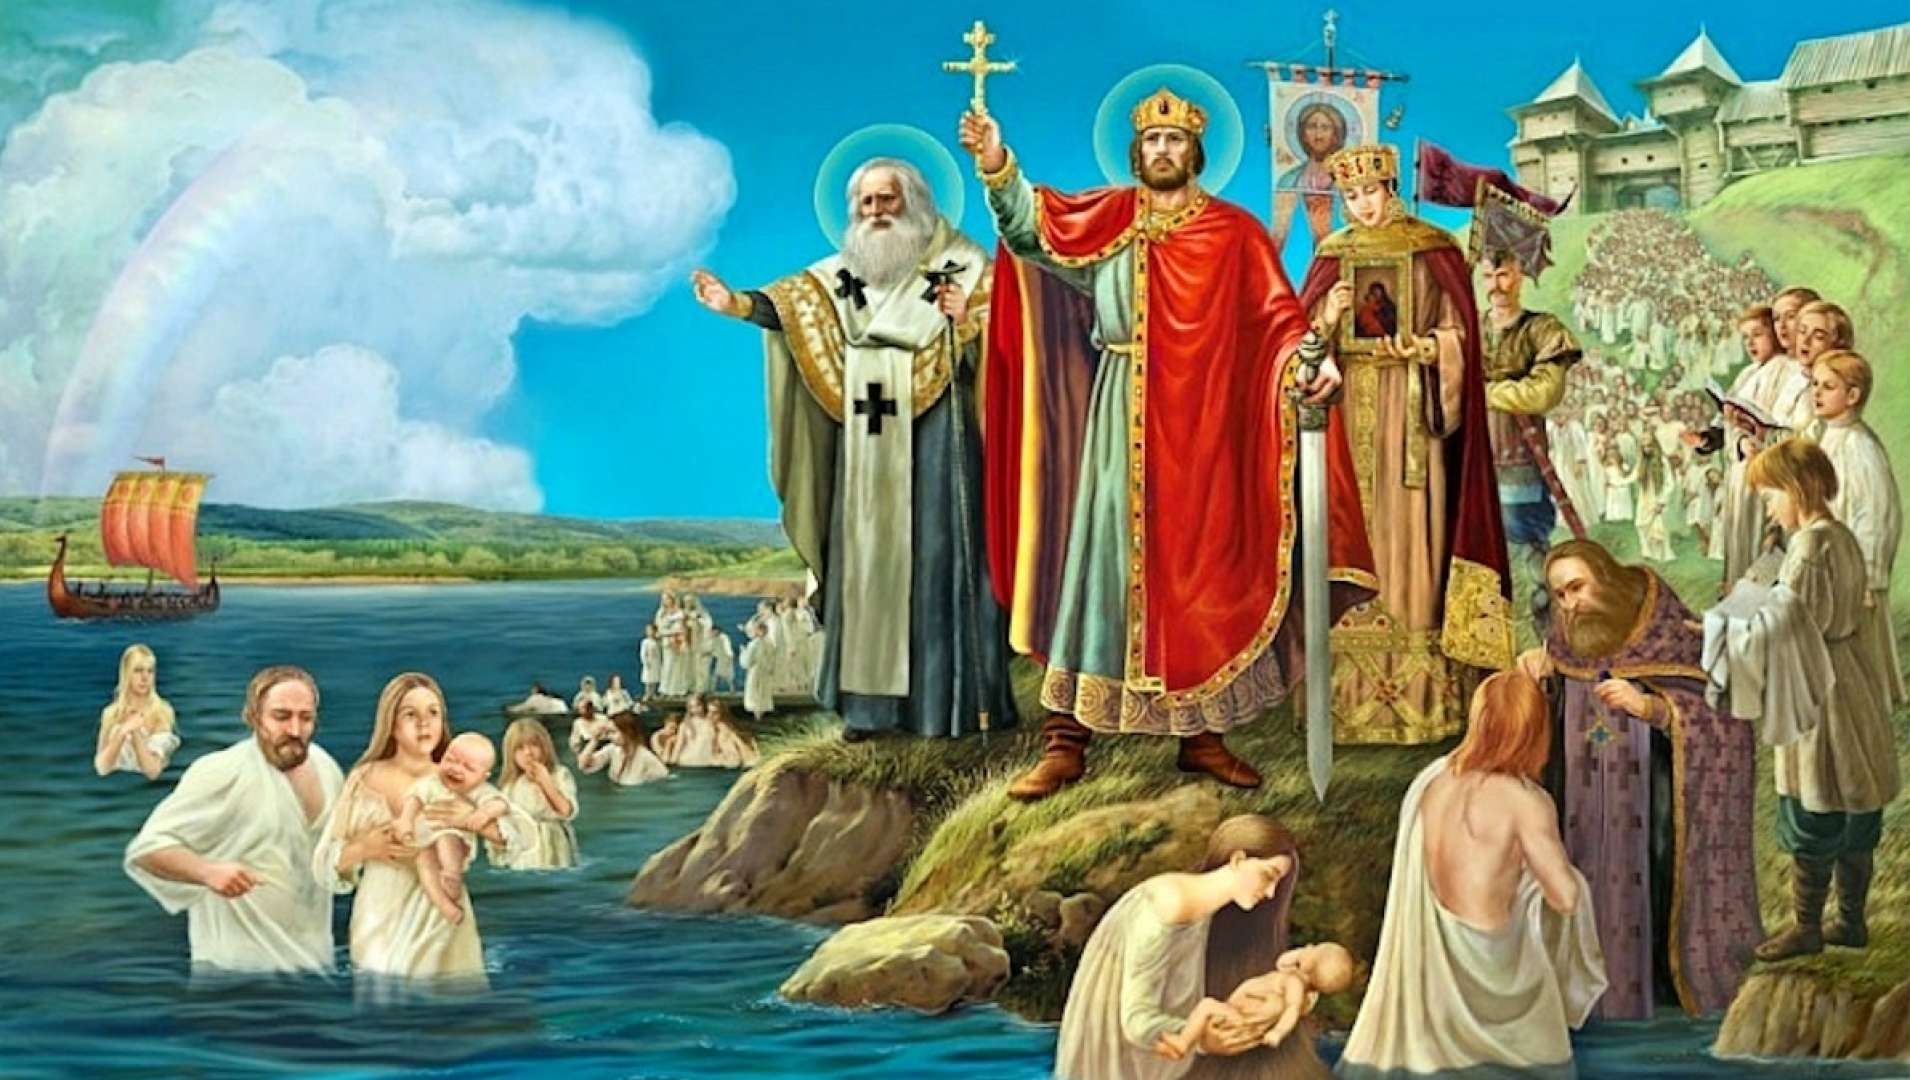 The Dormition of the Righteous Anna, mother of the Most Holy Theotokos